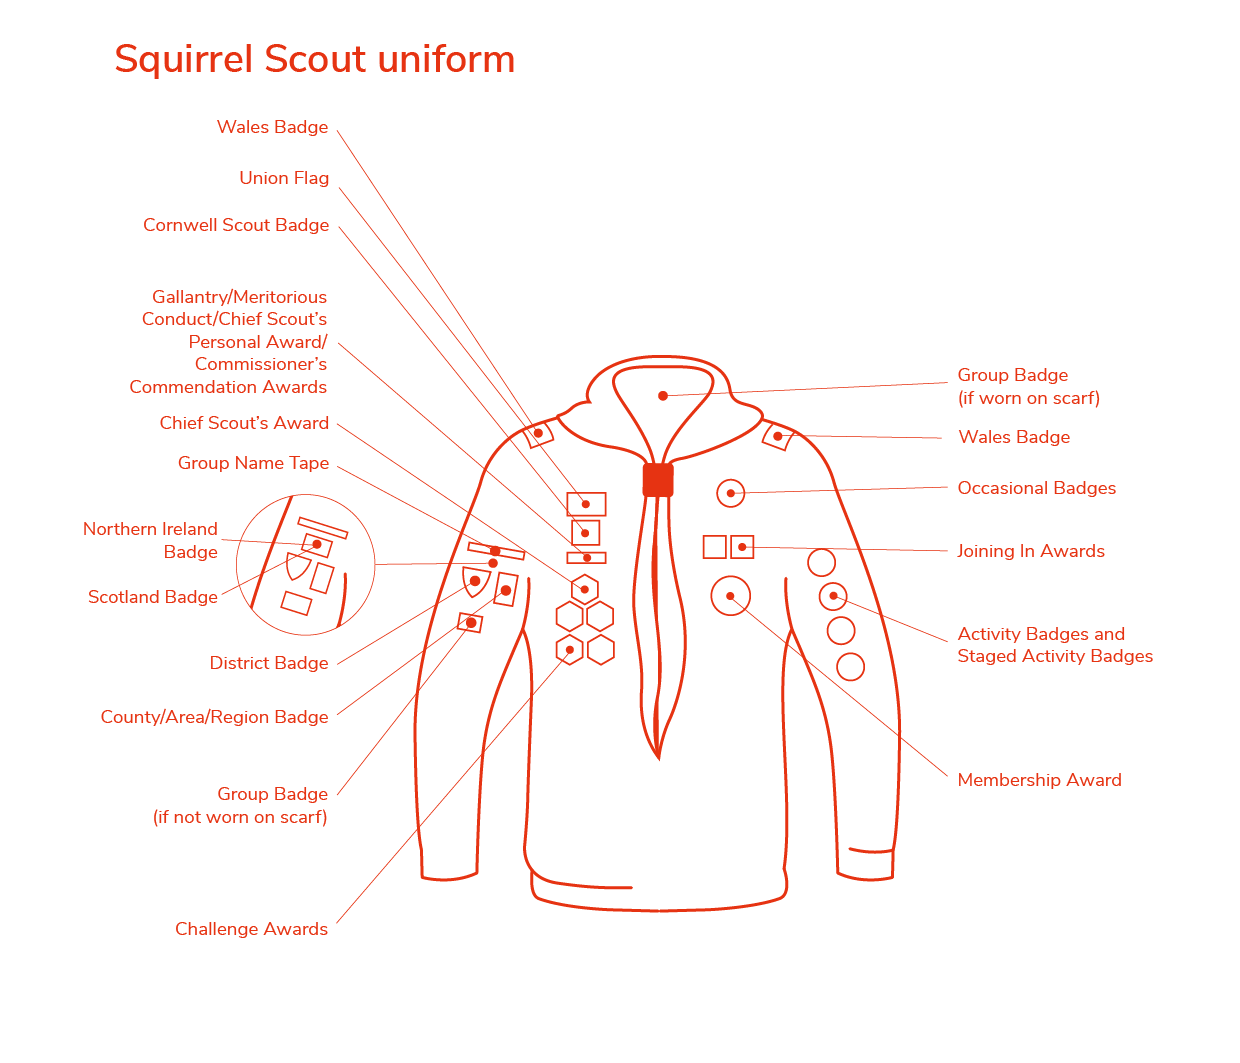 A diagram showing the placement of all Squirrel badges